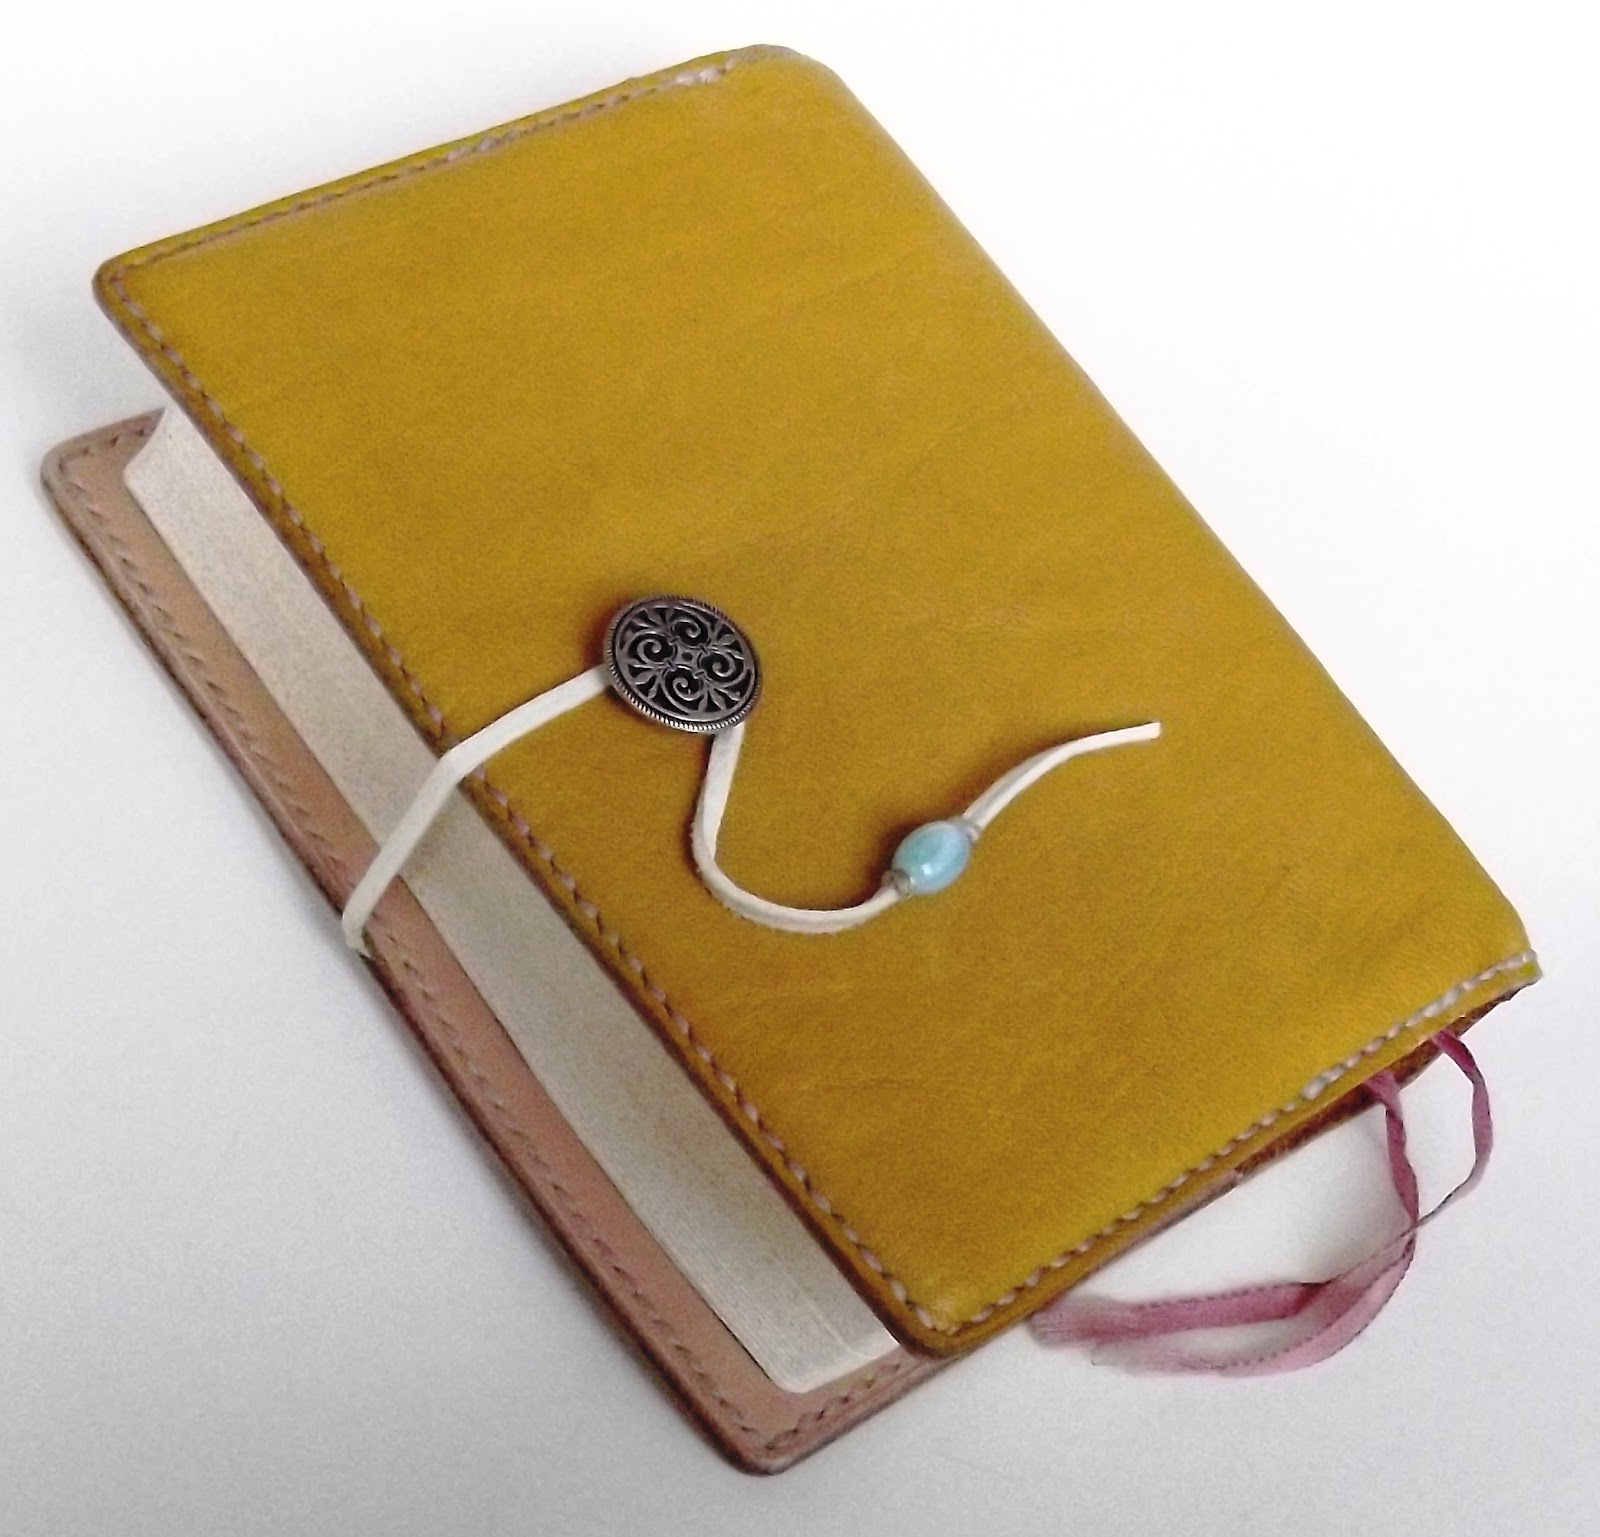 R I Leather Elkskin Bible Cover